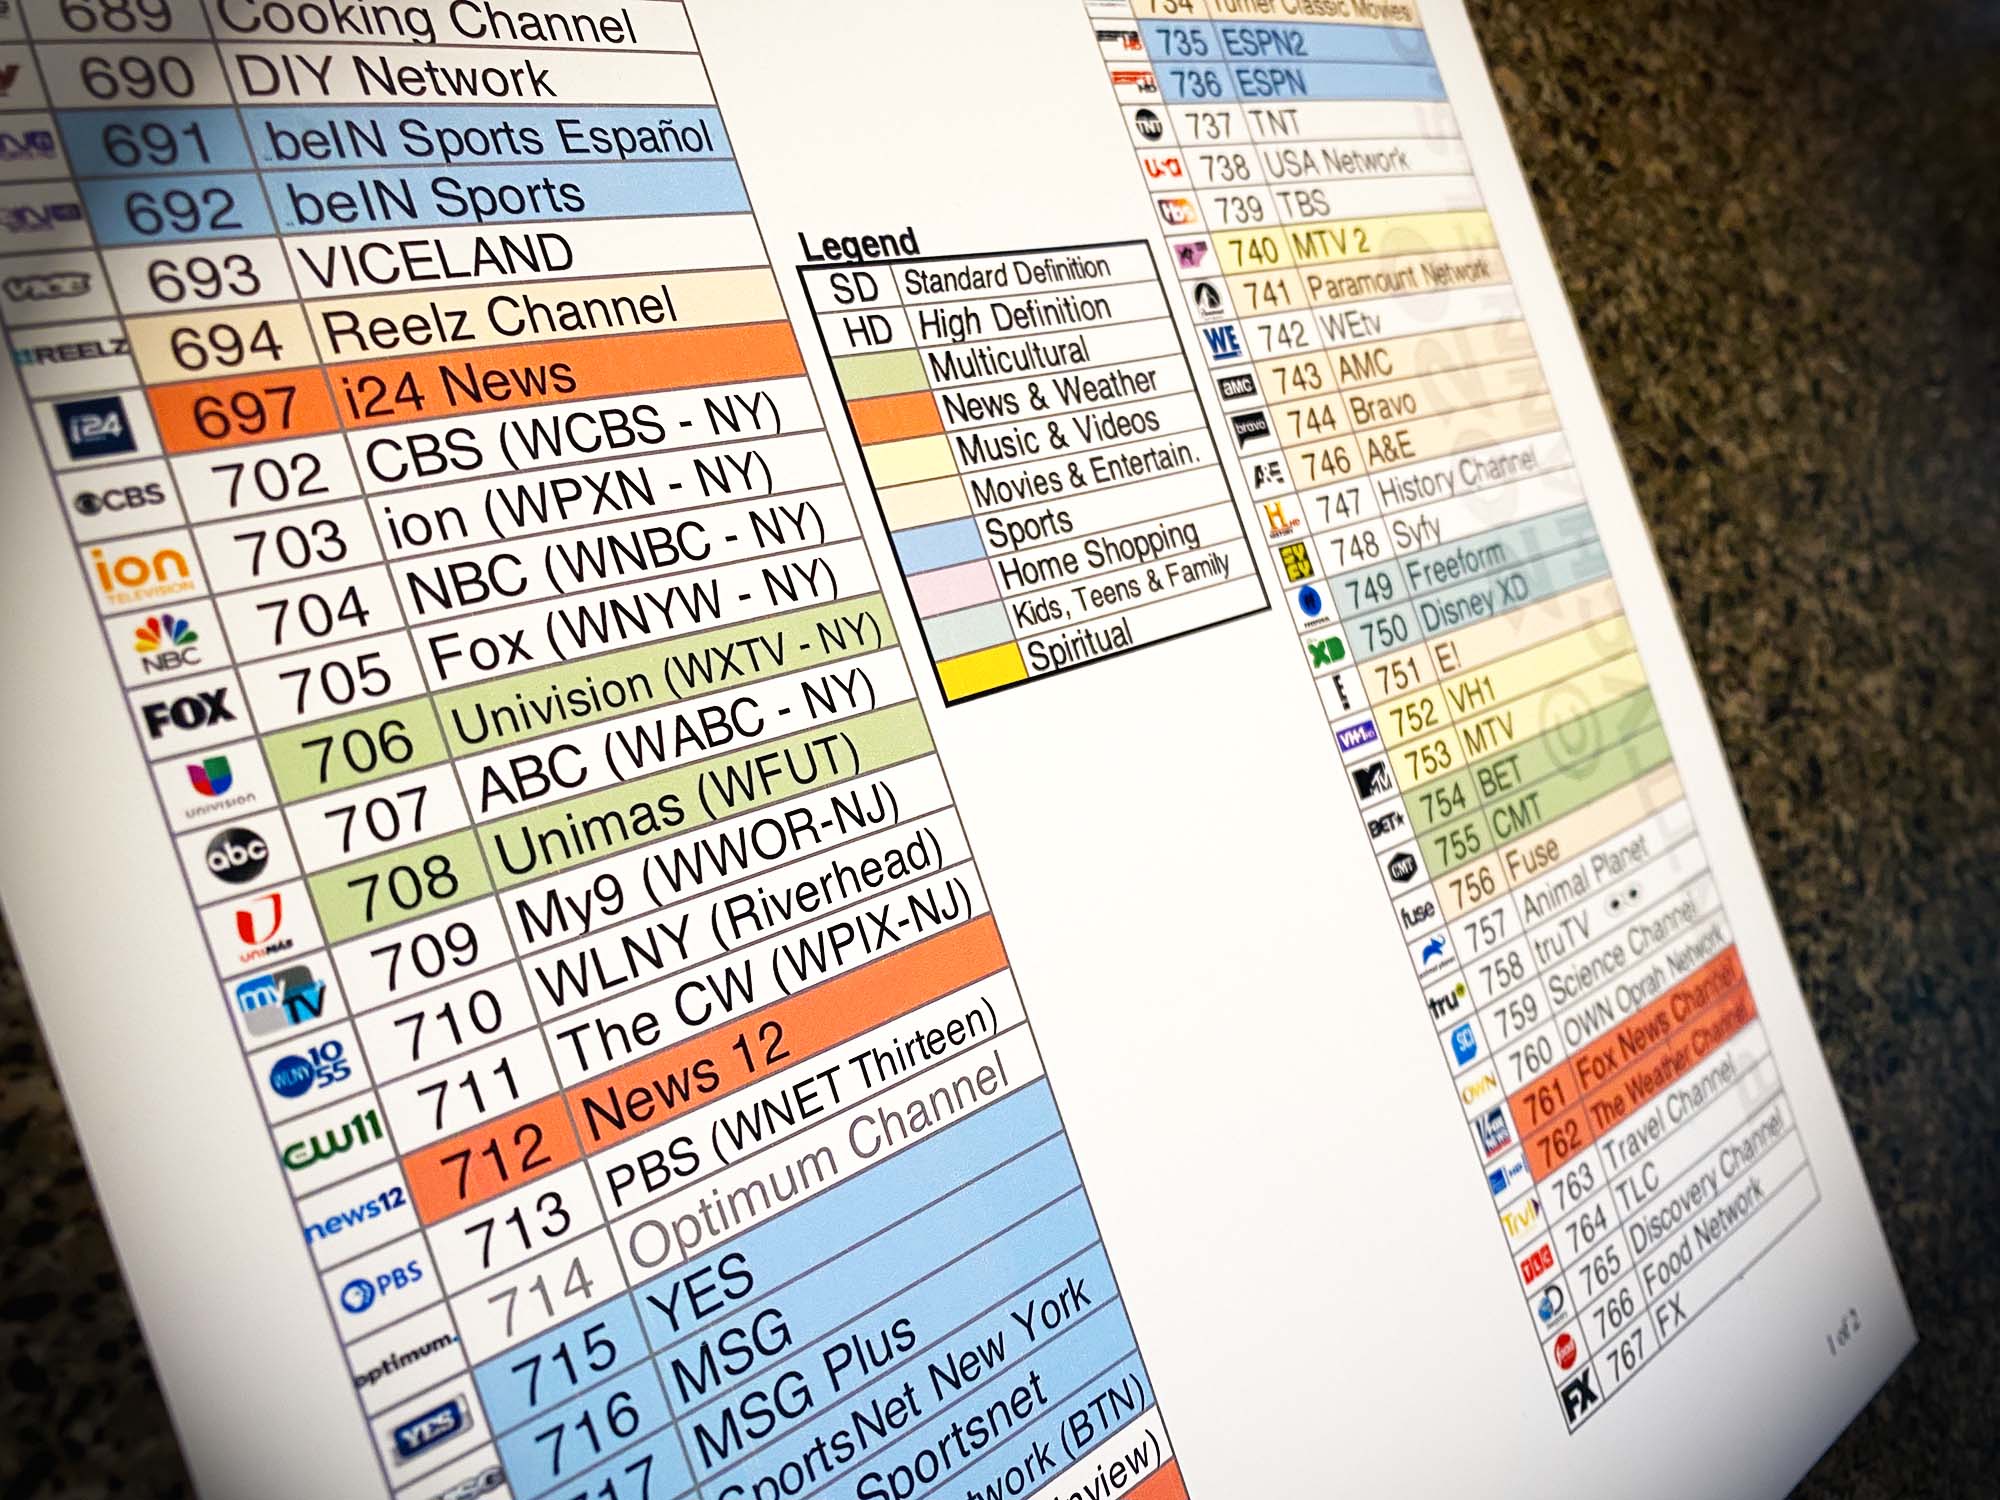 SIDE Photo of a Printed Optimum Cable TV Channel Listing. December 2020